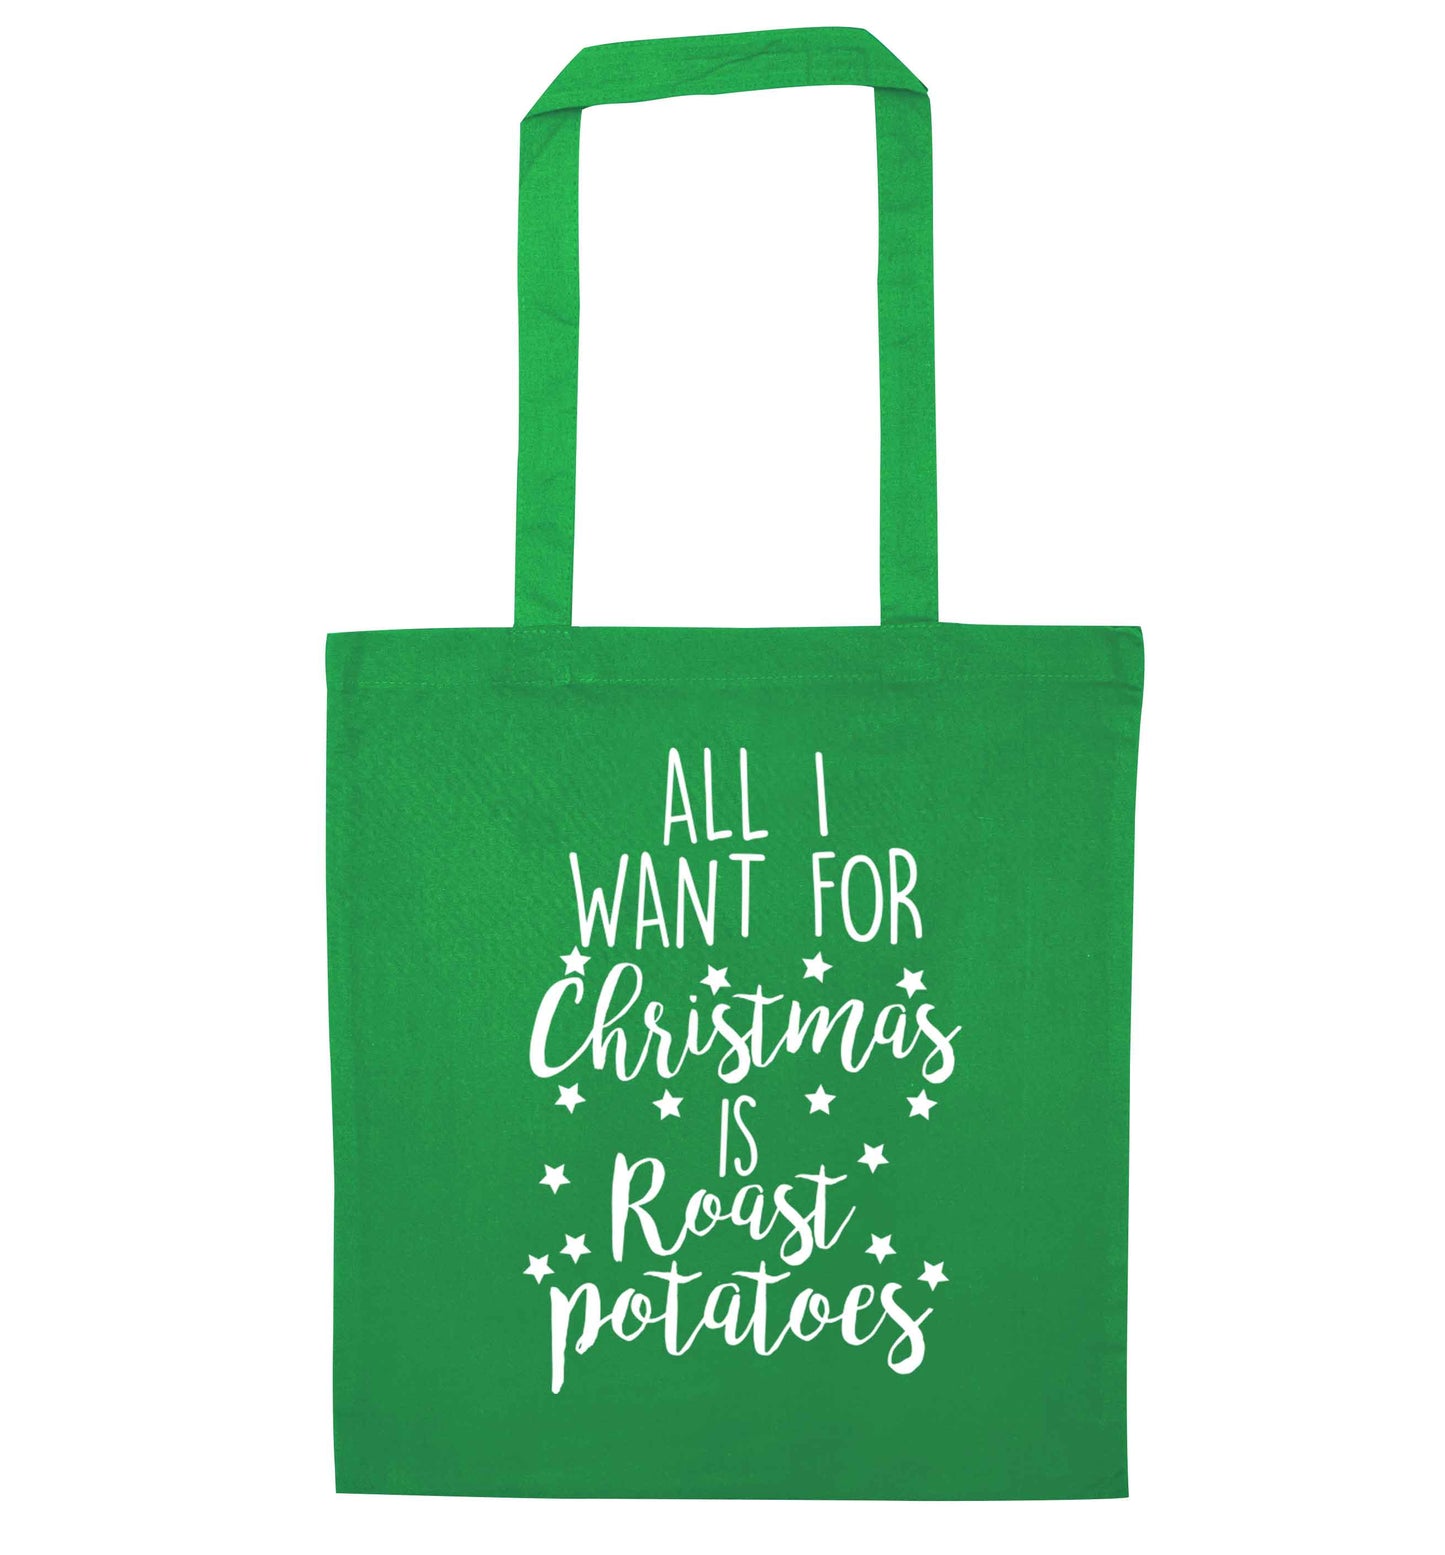 All I want for Christmas is roast potatoes green tote bag